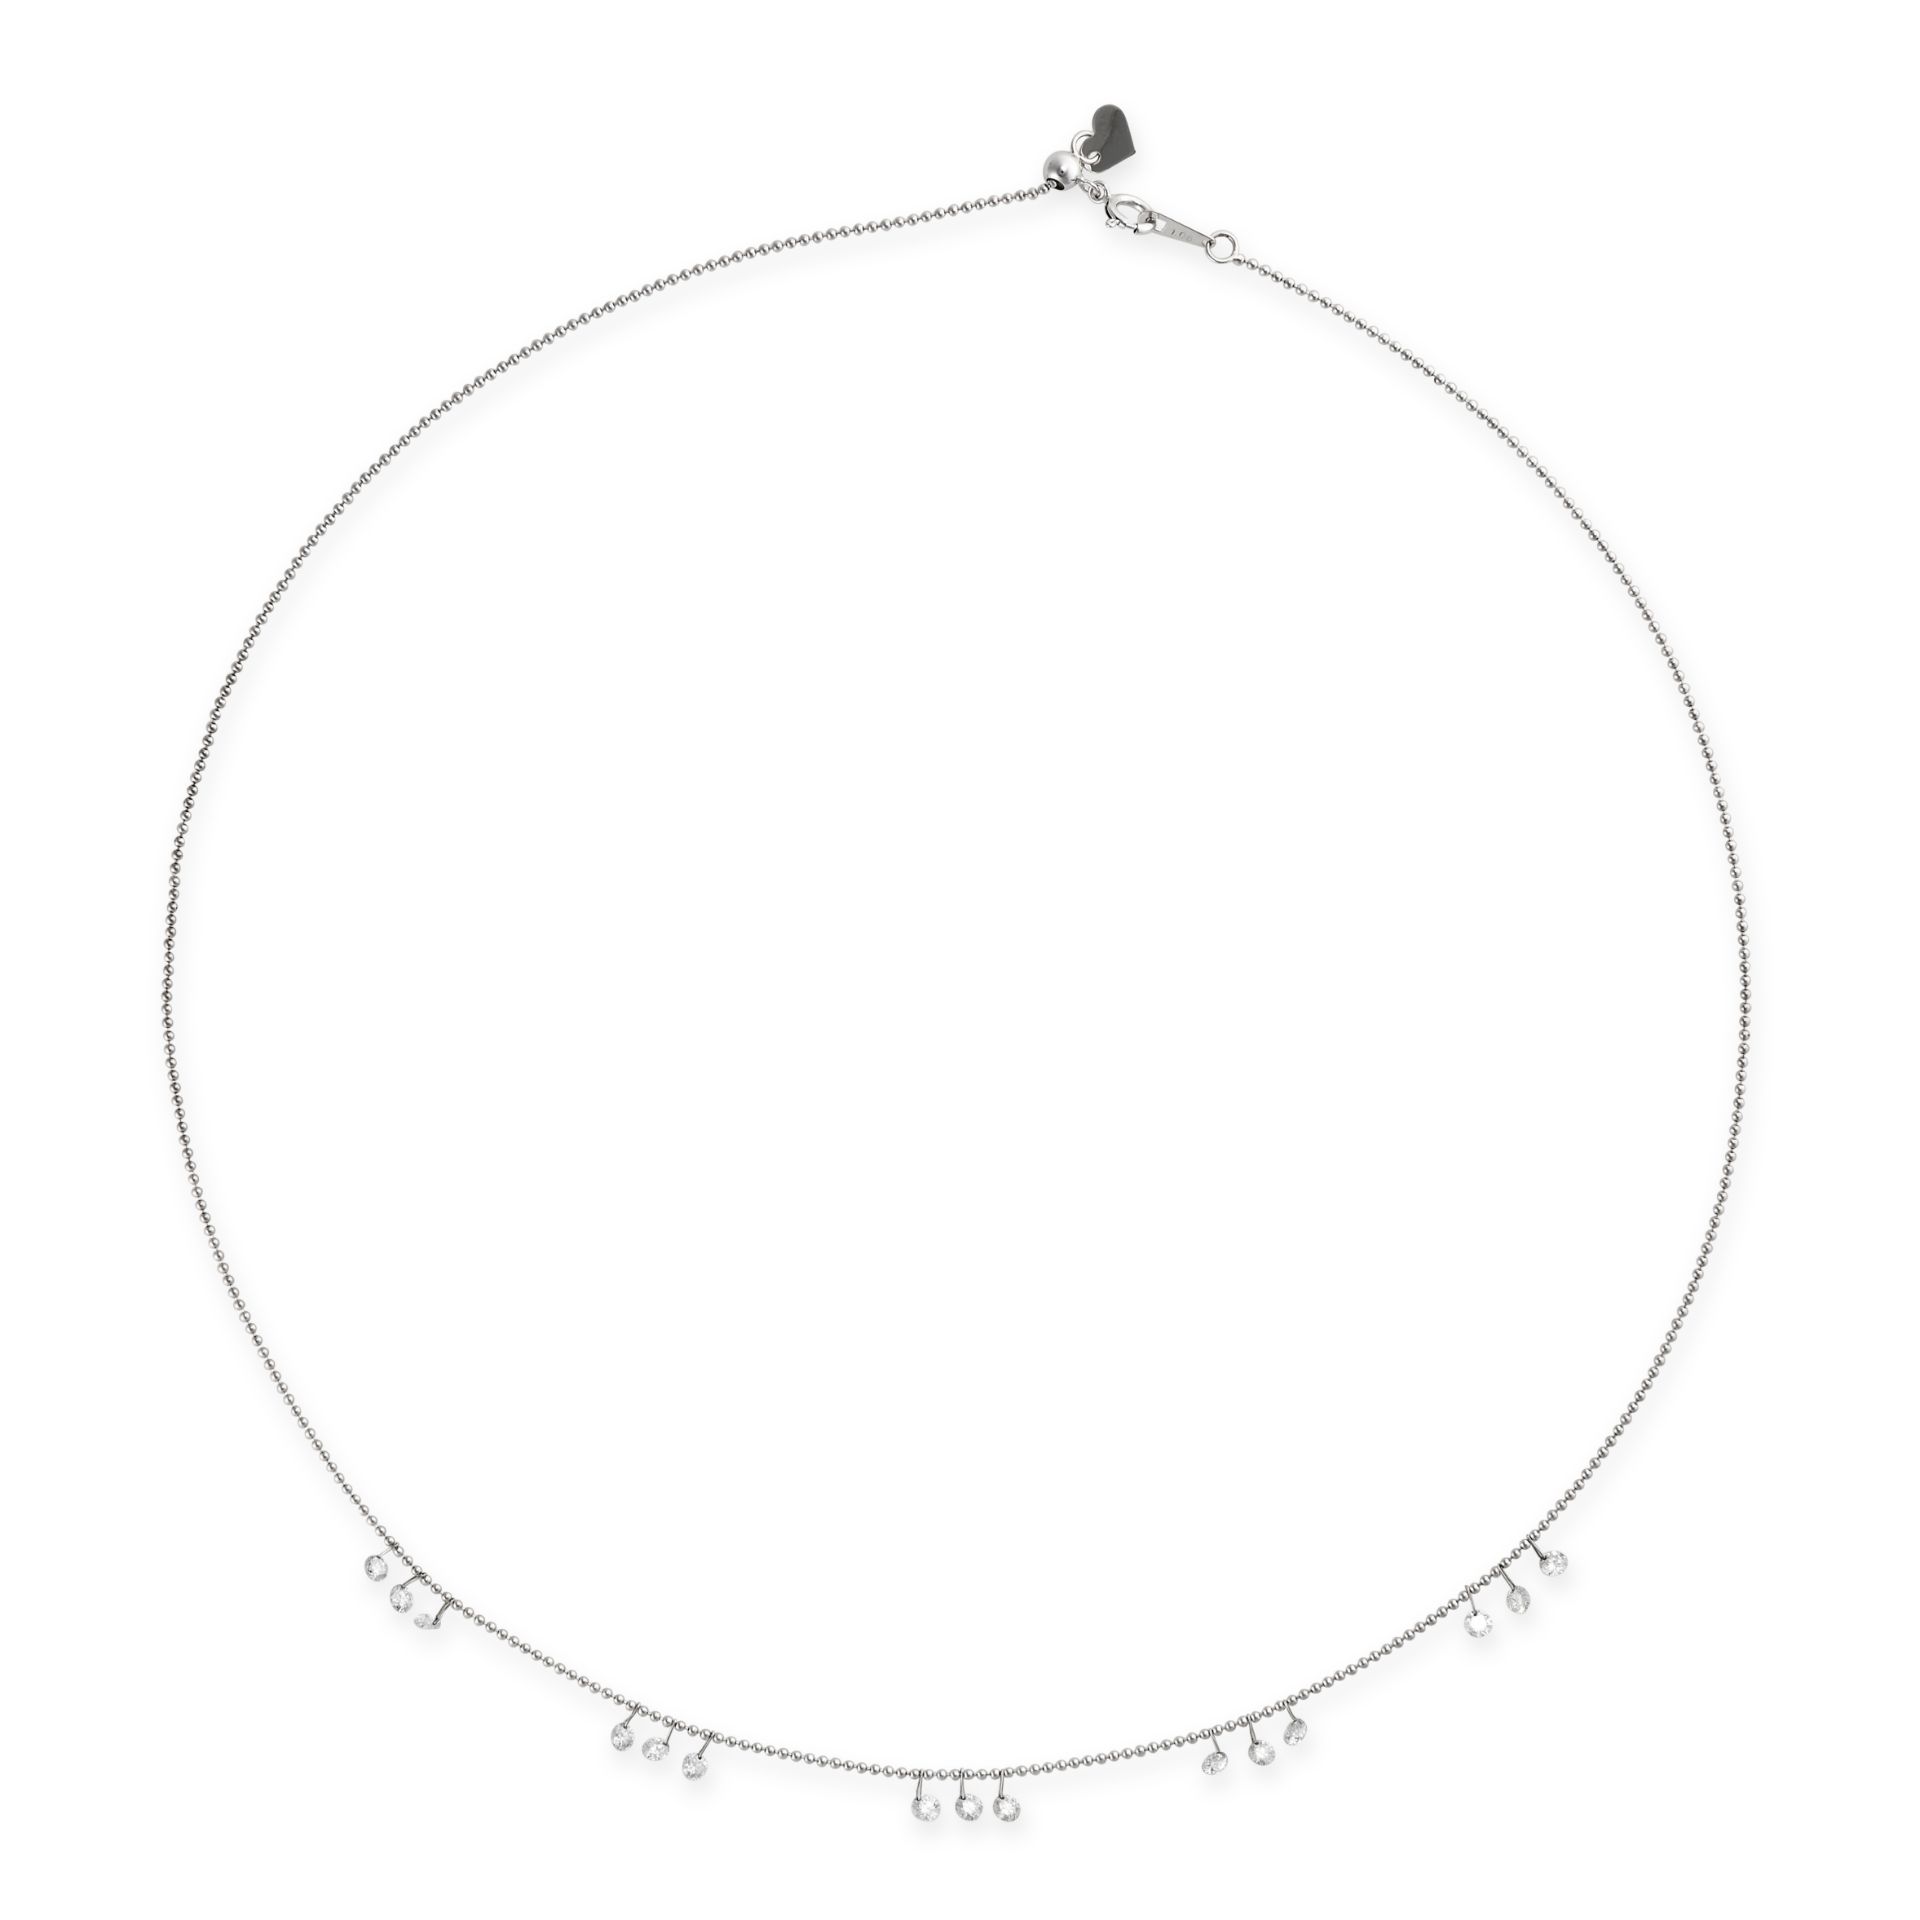 A DIAMOND CHAIN NECKLACE in 18ct white gold, comprising a beaded chain suspending fifteen round b...